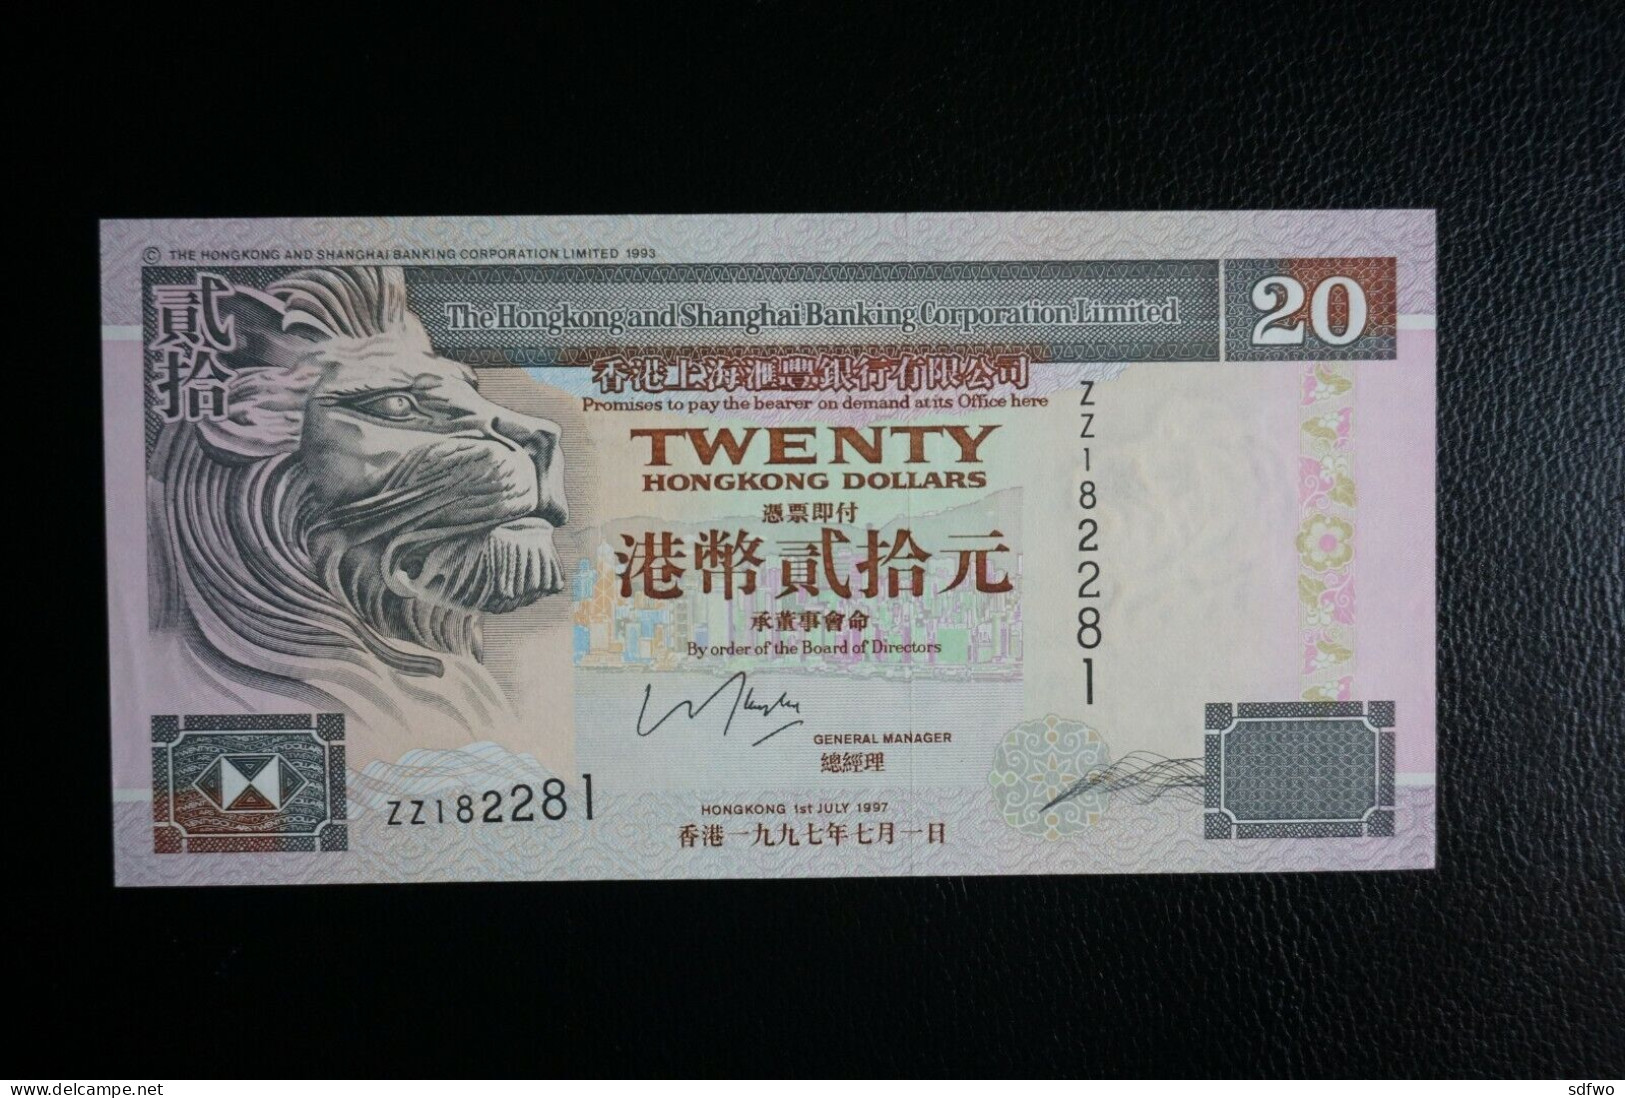 (Tv) 1997 HONG KONG OLD ISSUE - HSBC 20 DOLLARS - REPLACEMENT ISSUE #ZZ182,281 (UNC) - Hongkong